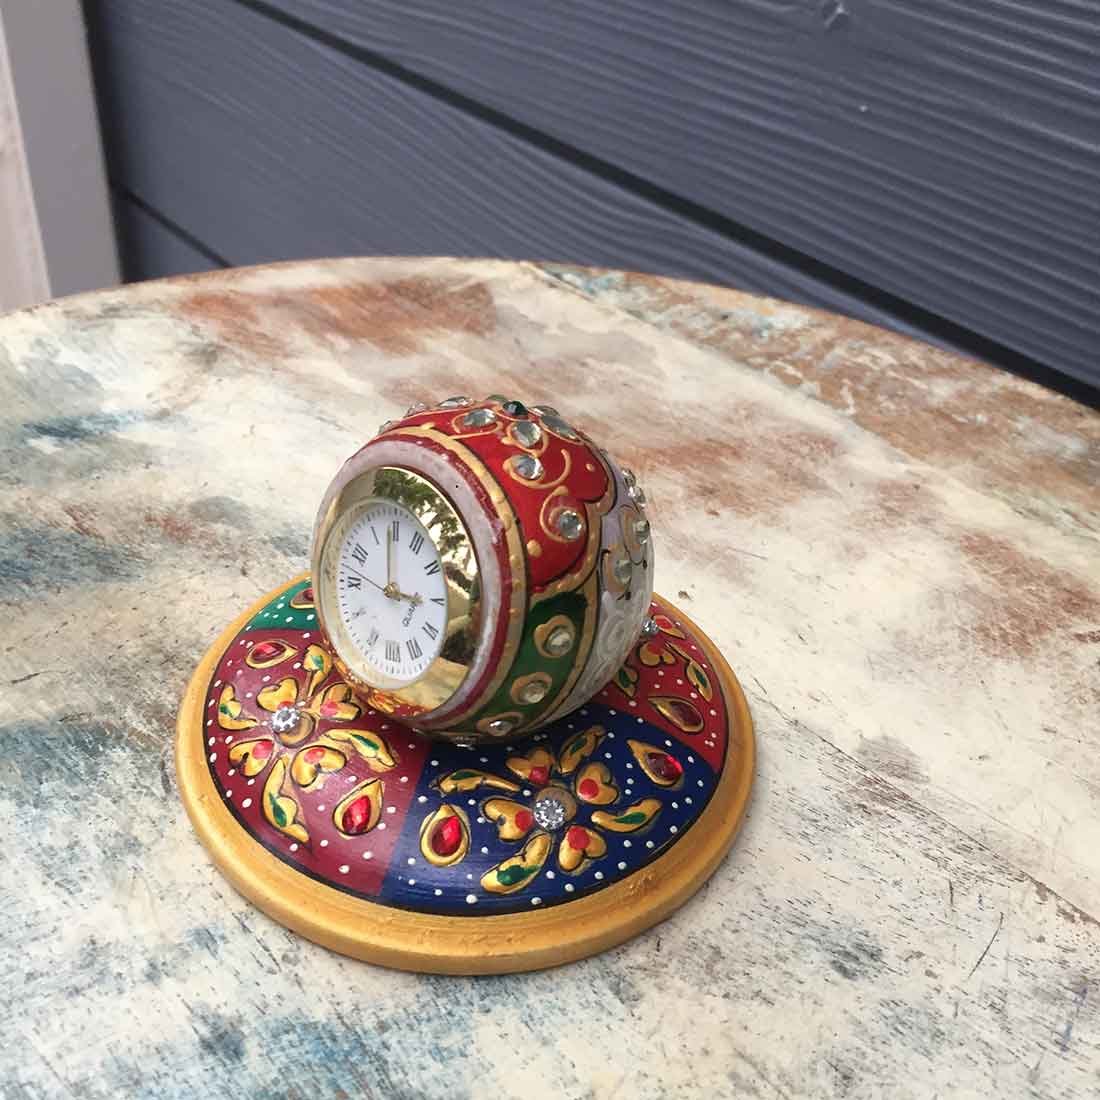 Marble Table Clock - For Home & Gifts - 3 Inch - ApkaMart